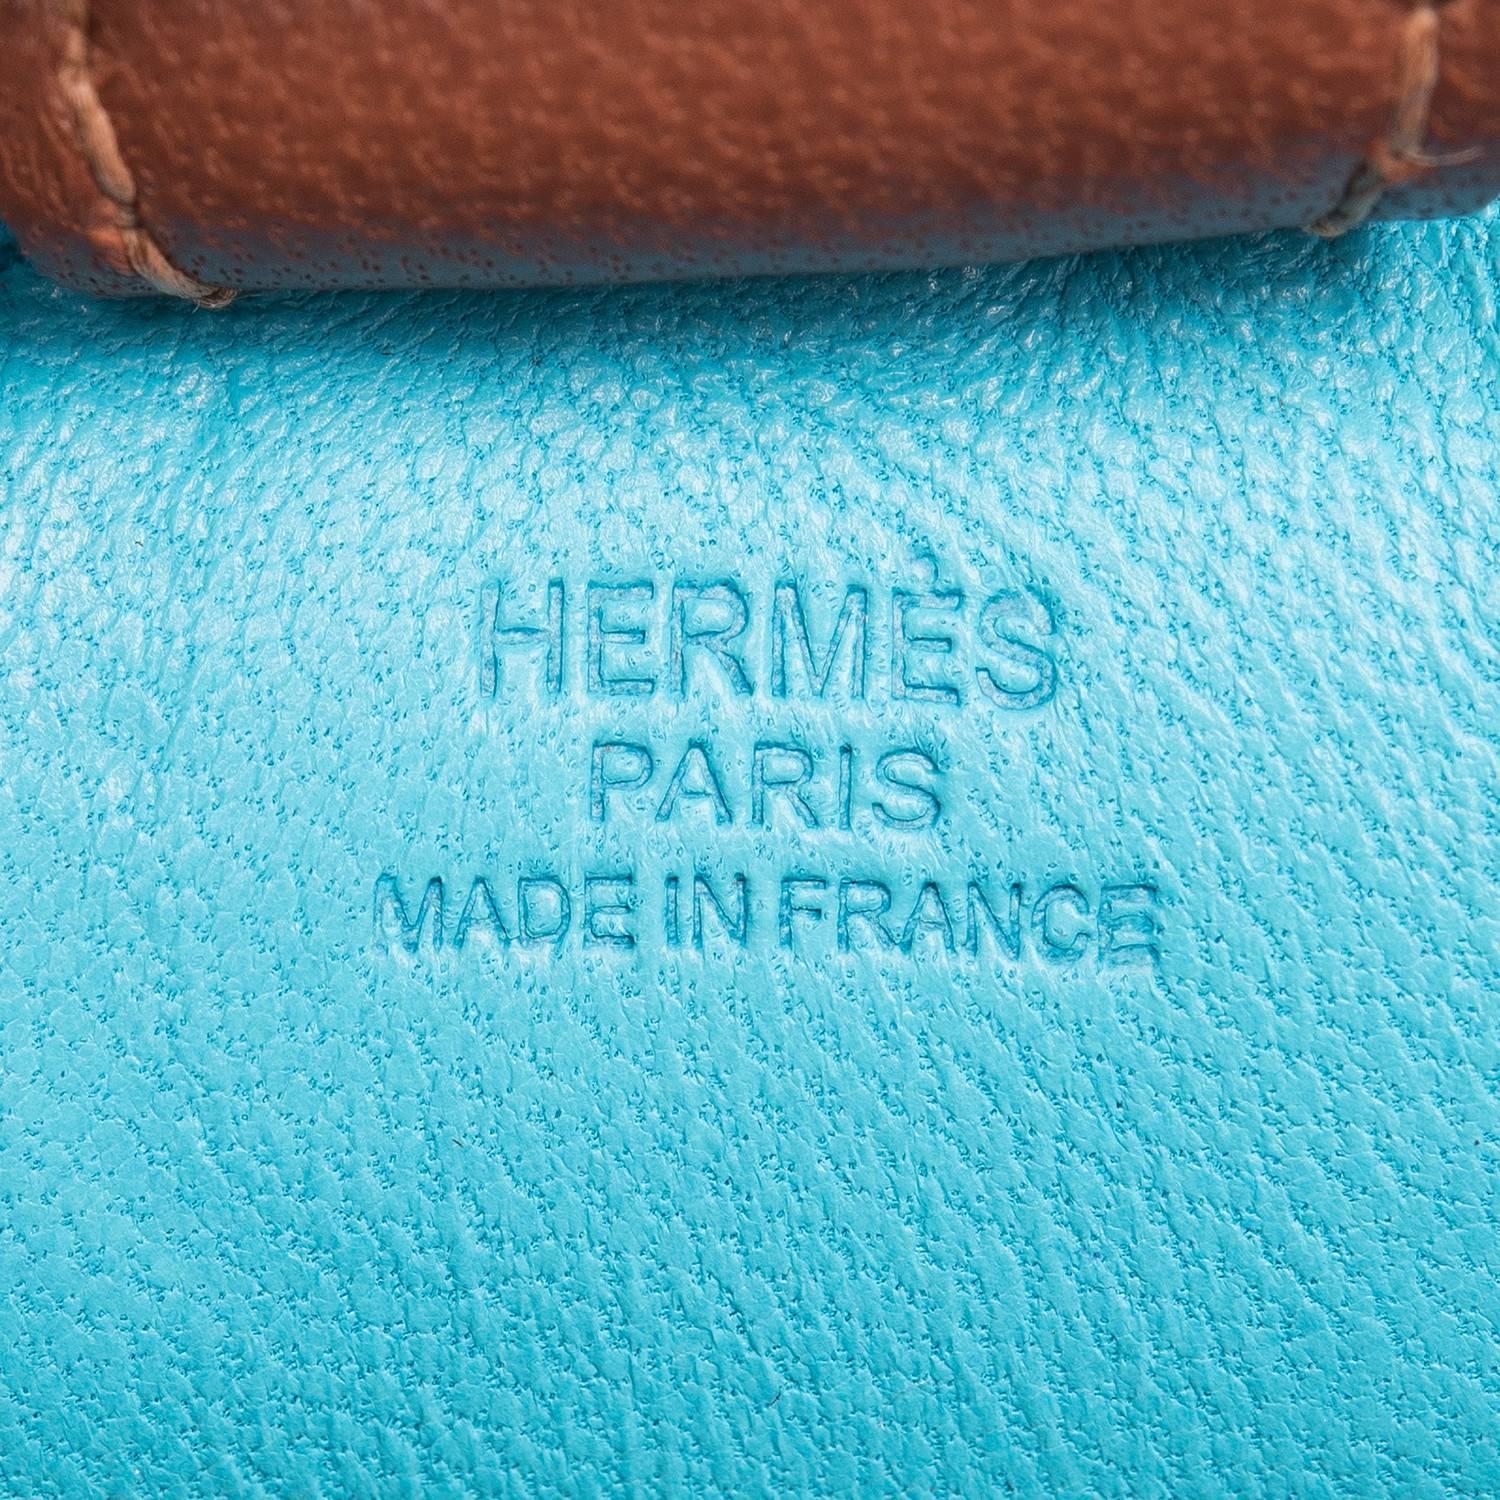 Hermes Grigri Rodeo bag charm in size PM.
 
This charm is made of Blue Izmir Milo lambskin leather and accented with a Blue Electric mane and tail and a brown saddle and holder.

Origin: France
 
Condition: Never carried
 
Accompanied by: Hermes